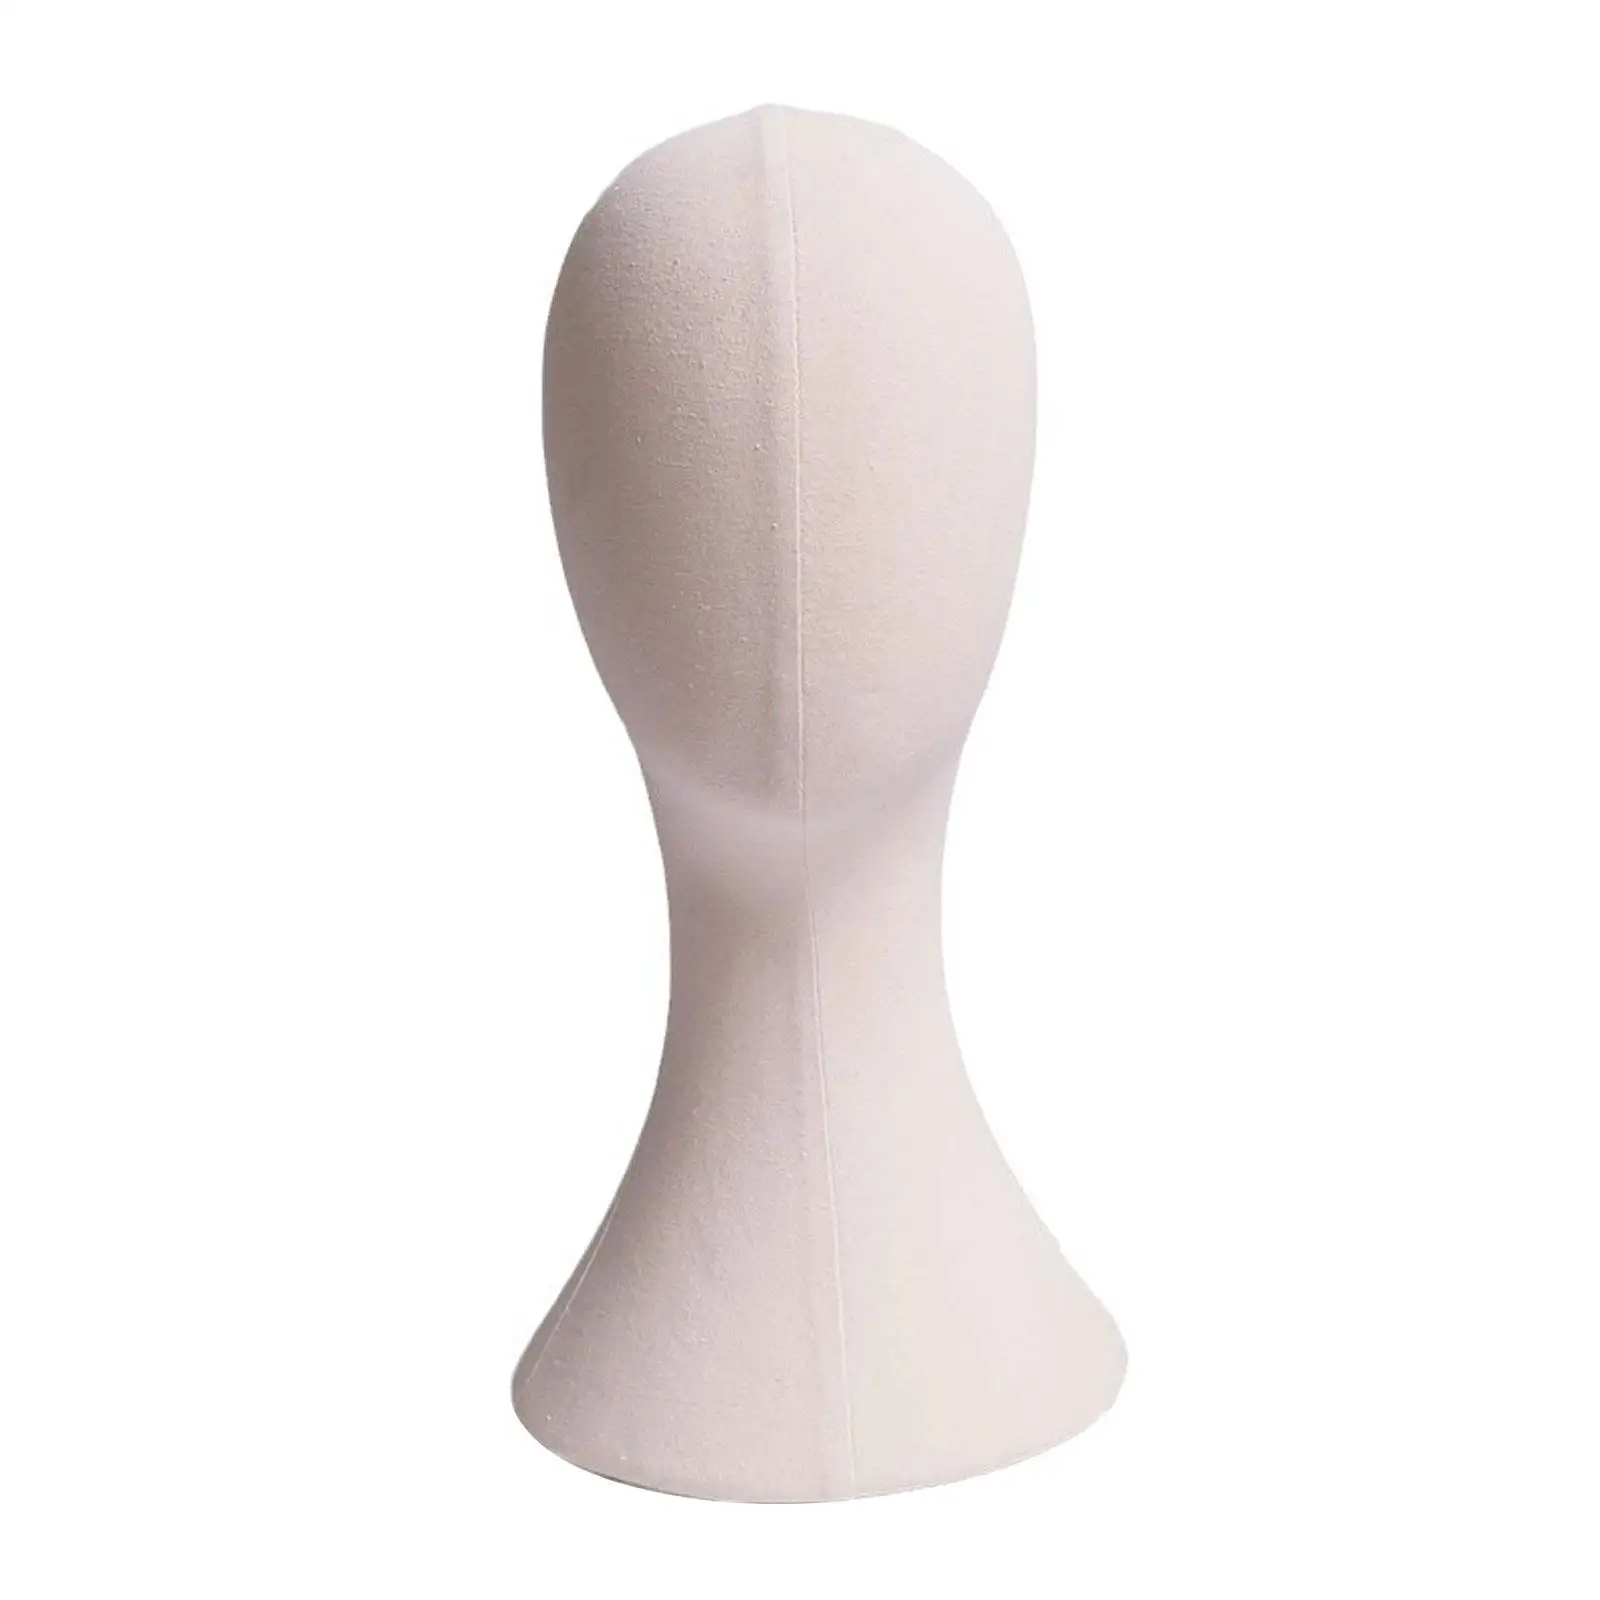 Mannequin Head Round Base Mannequin Manikin Head Height 15.55`` Hair Display Stand for Display Hat Headphone Glasses Cap Styling